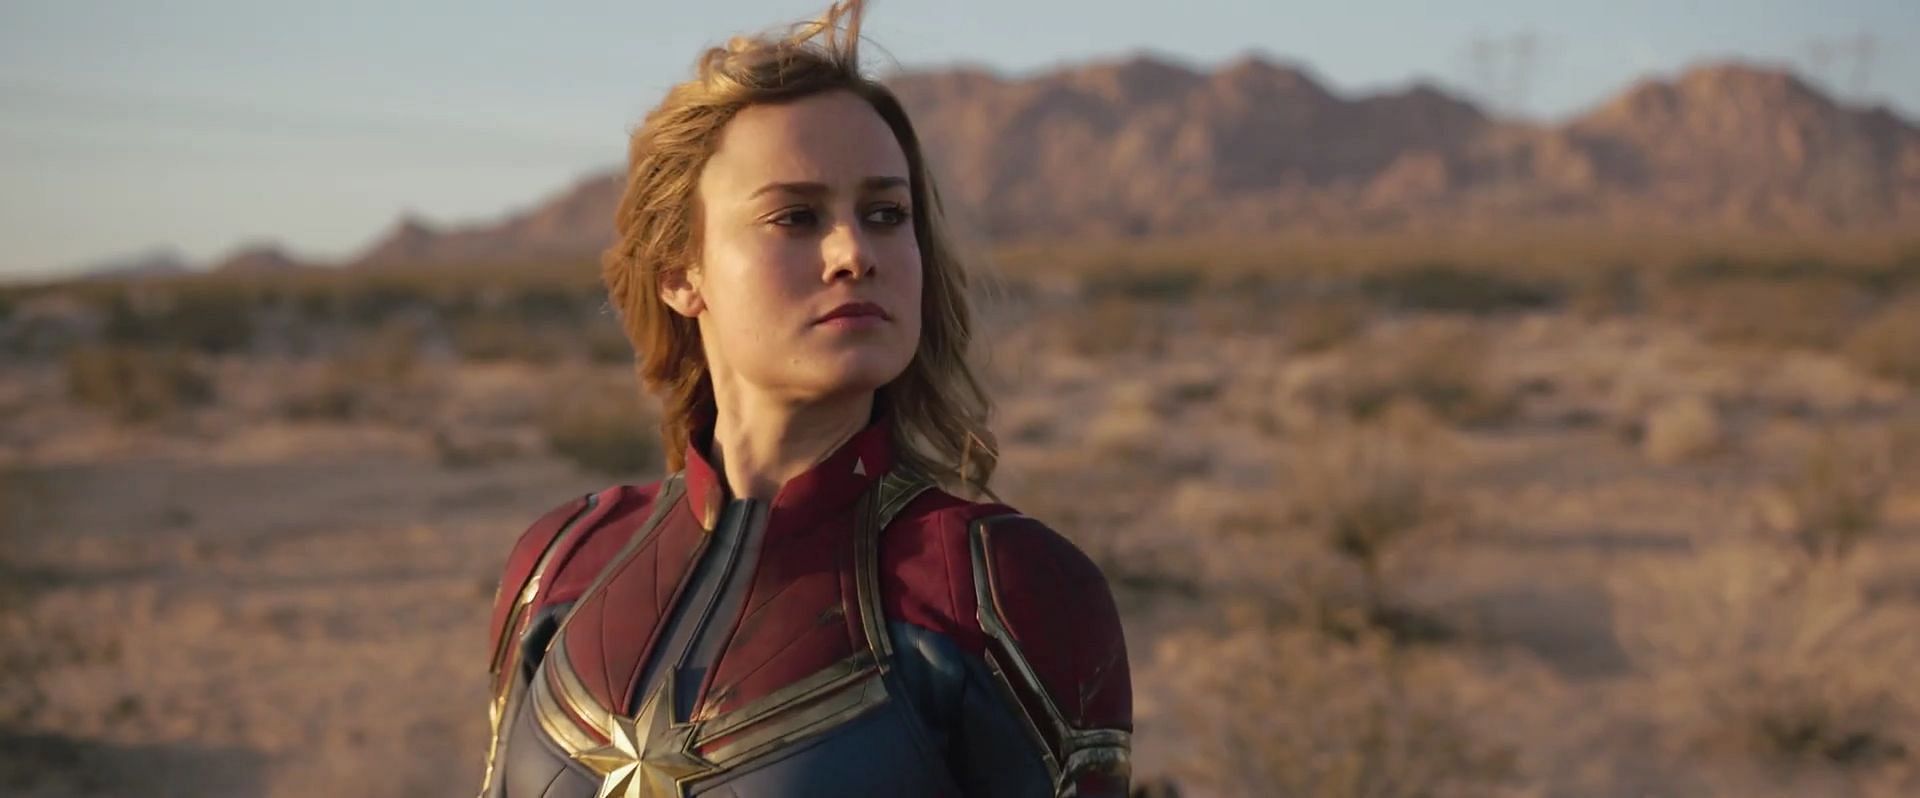 Brie Larson returns as Carol Danvers in the sequel, building on the legacy of the beloved Captain Marvel character (Image via Marvel Studios)